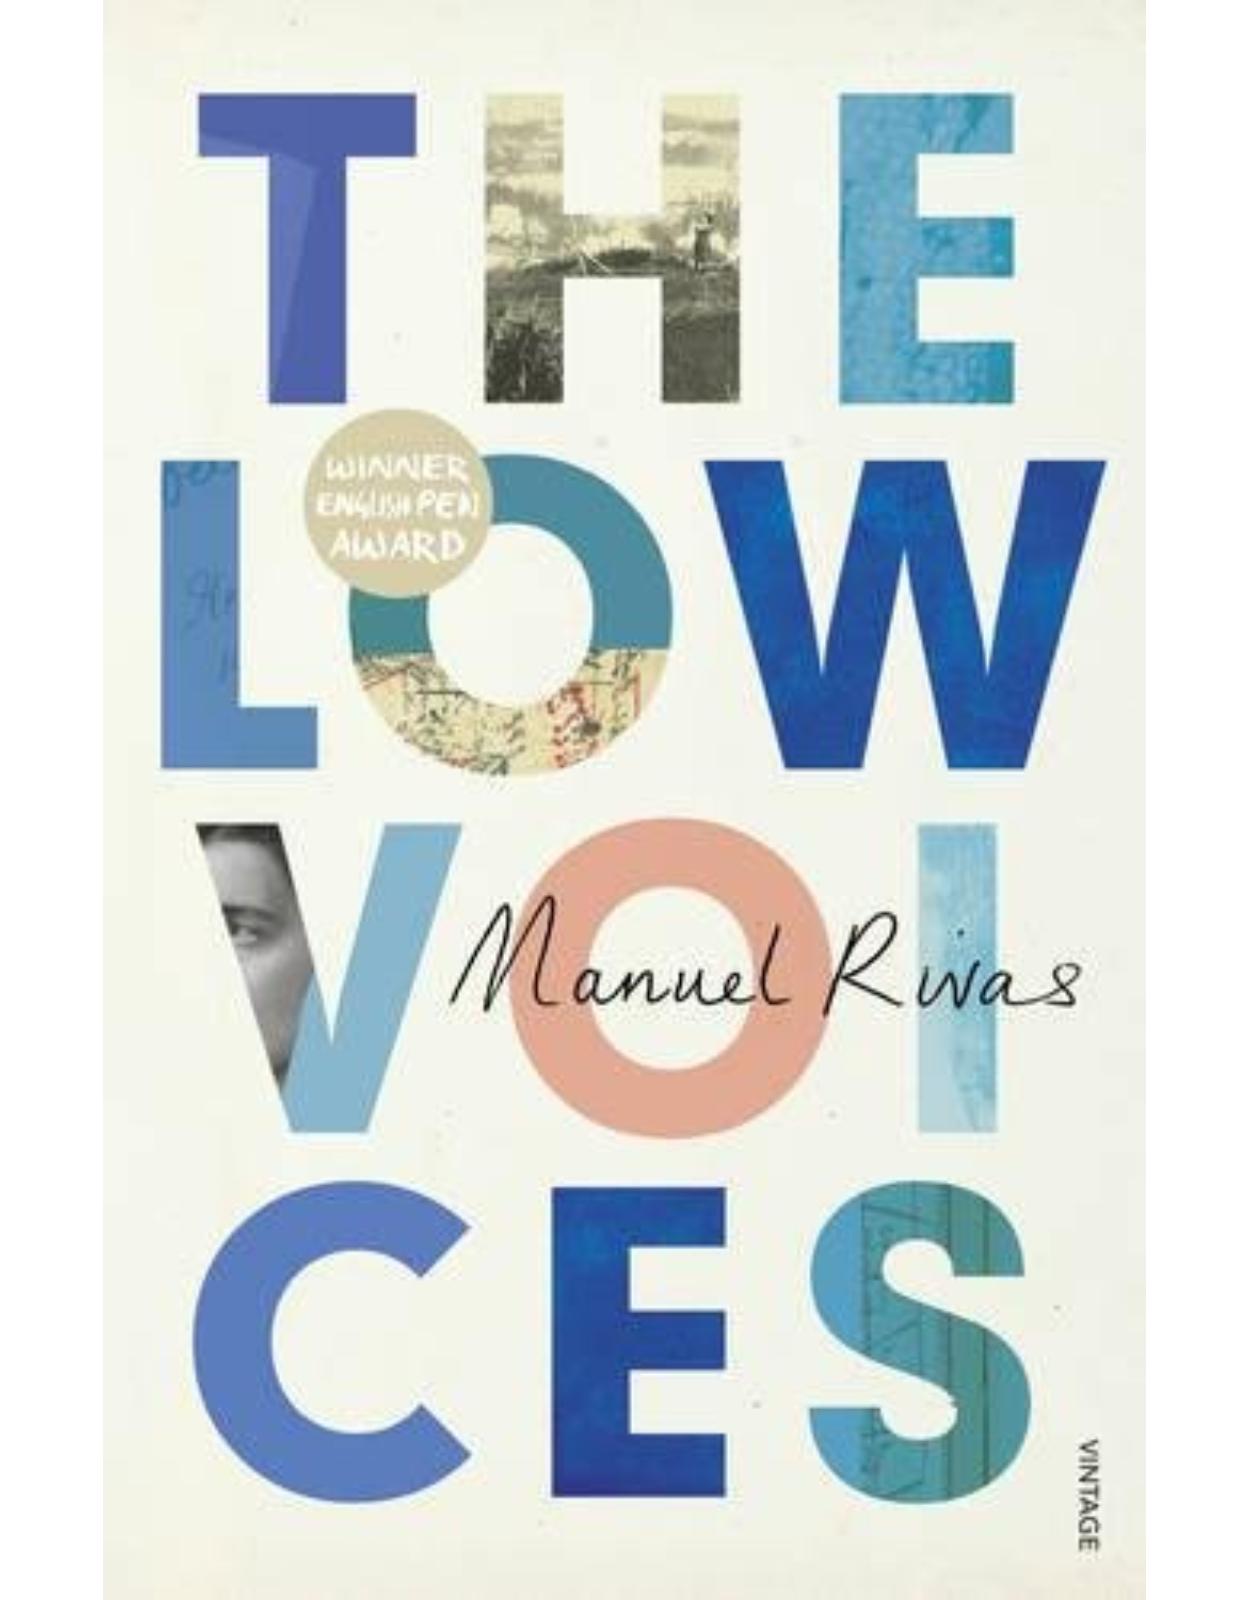 The Low Voices